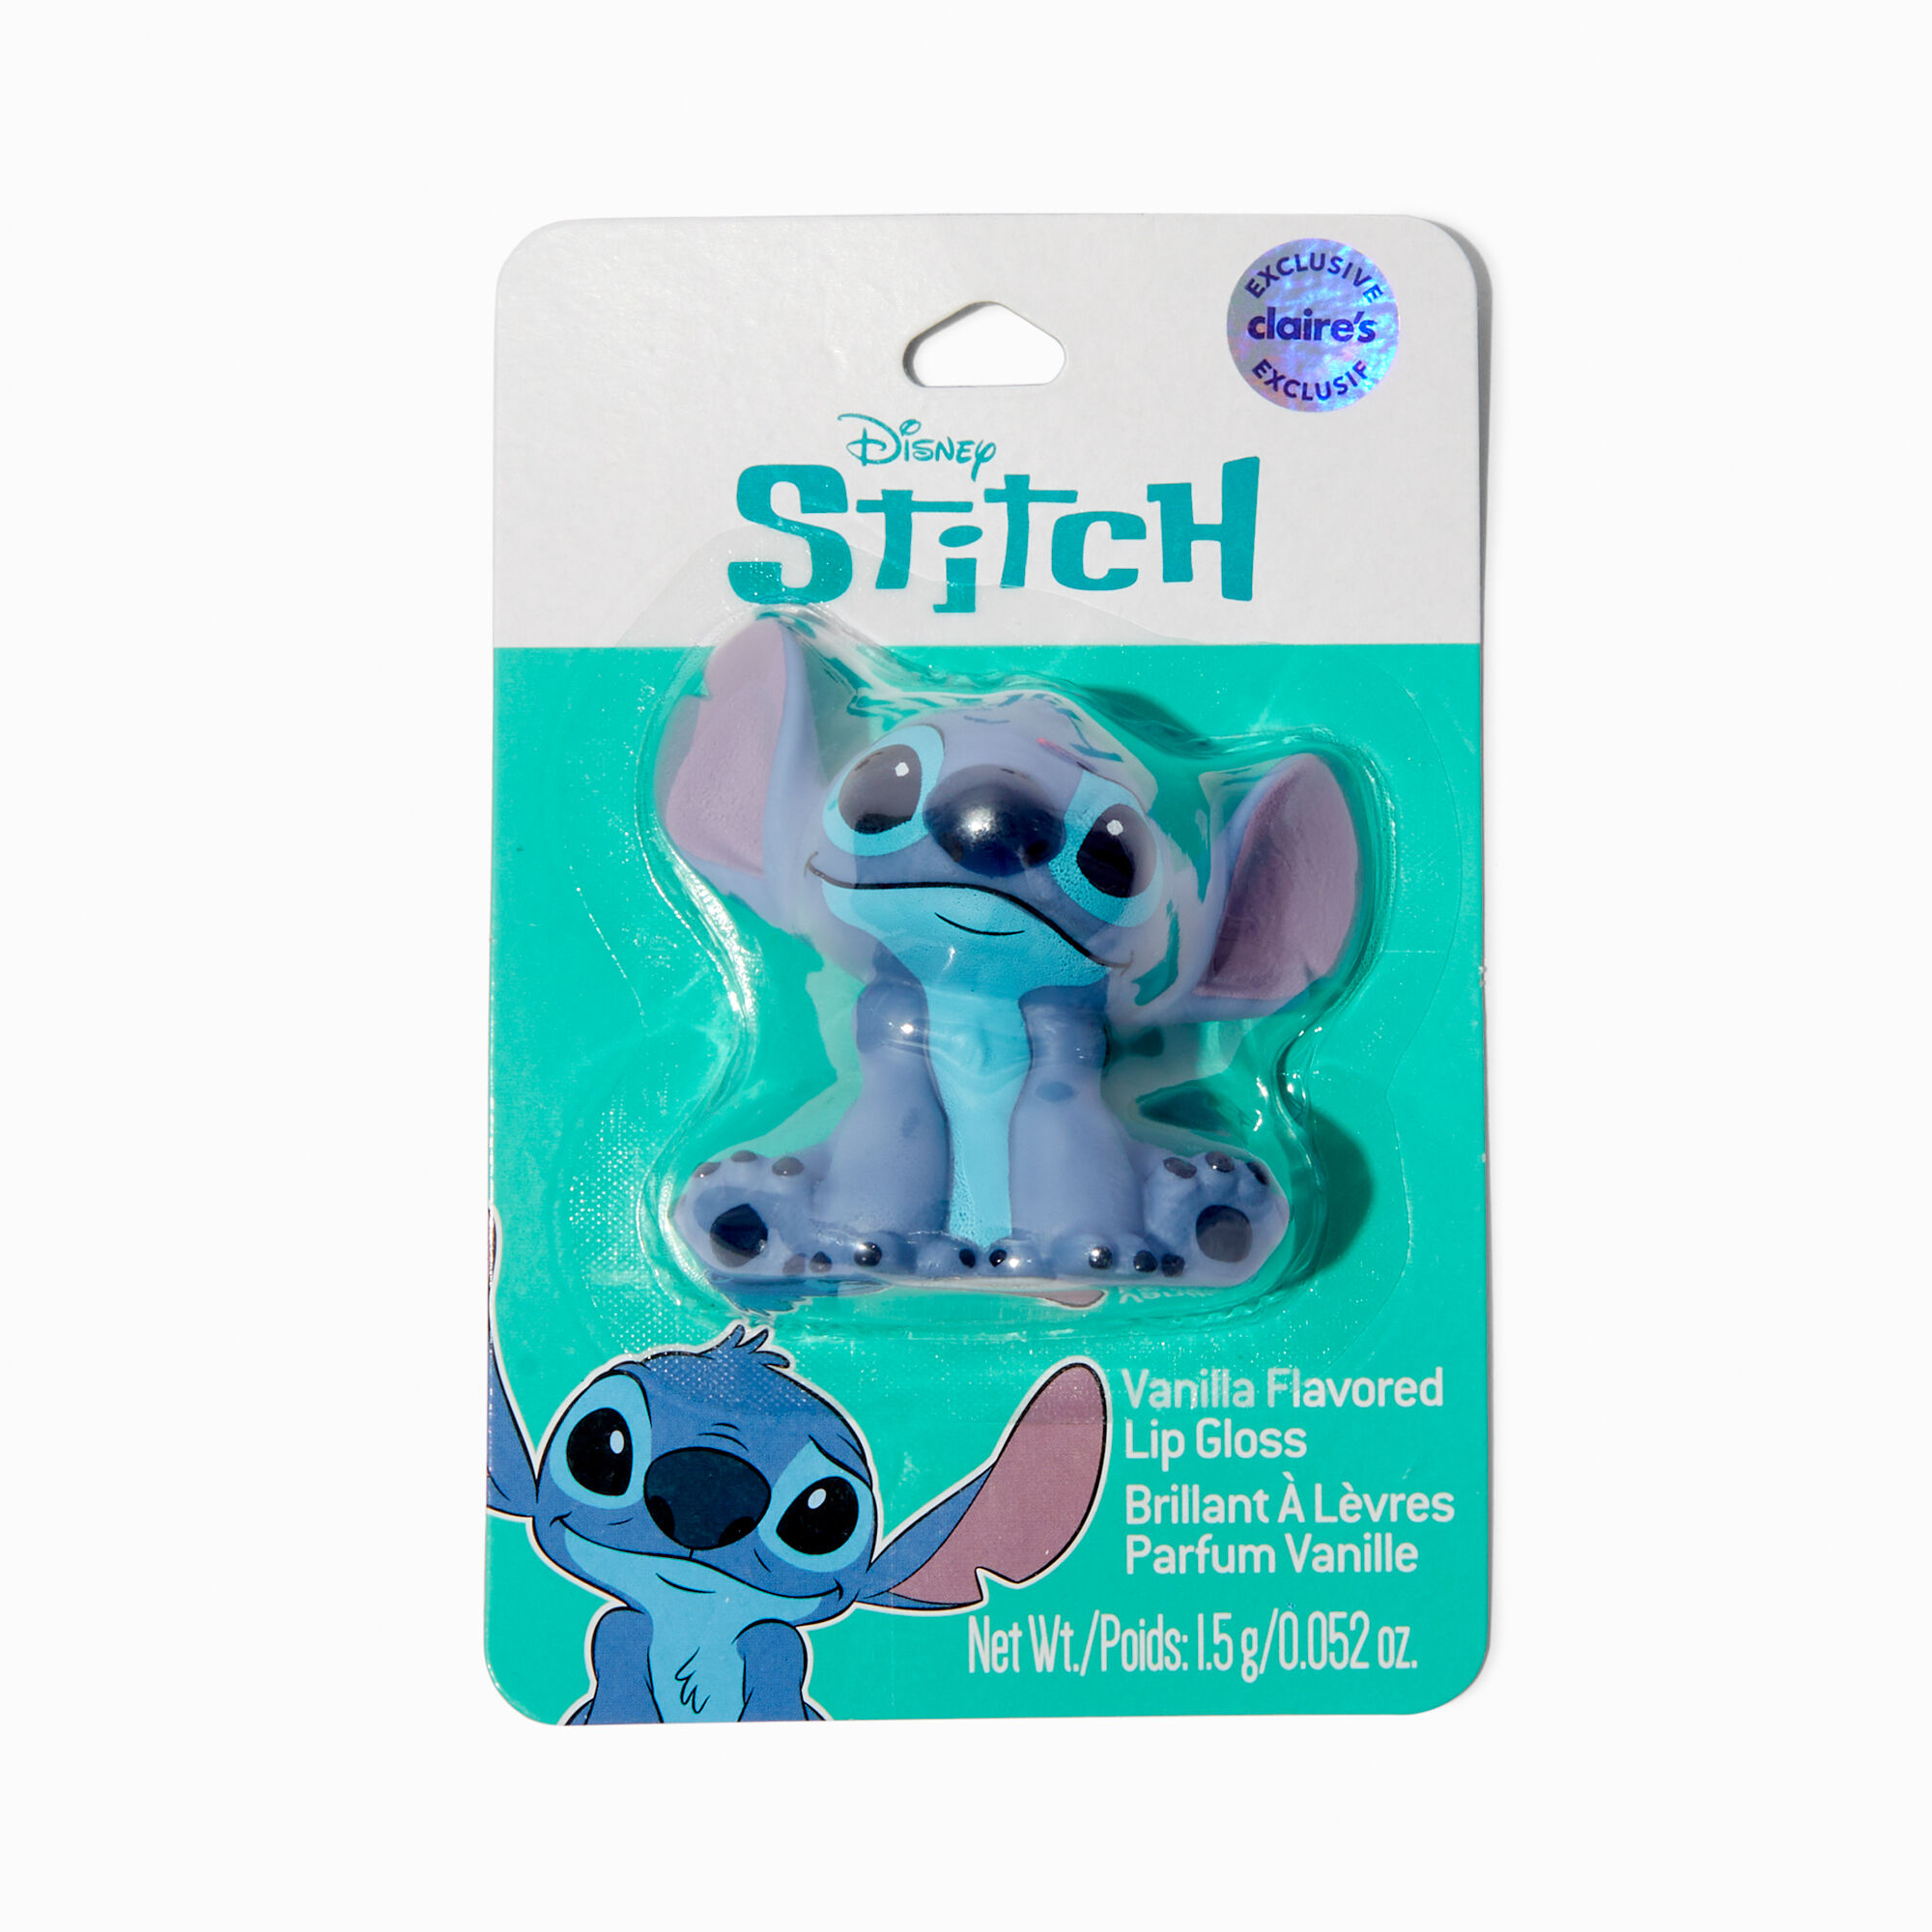 View Disney Stitch Claires Exclusive Flavored Lip Gloss information